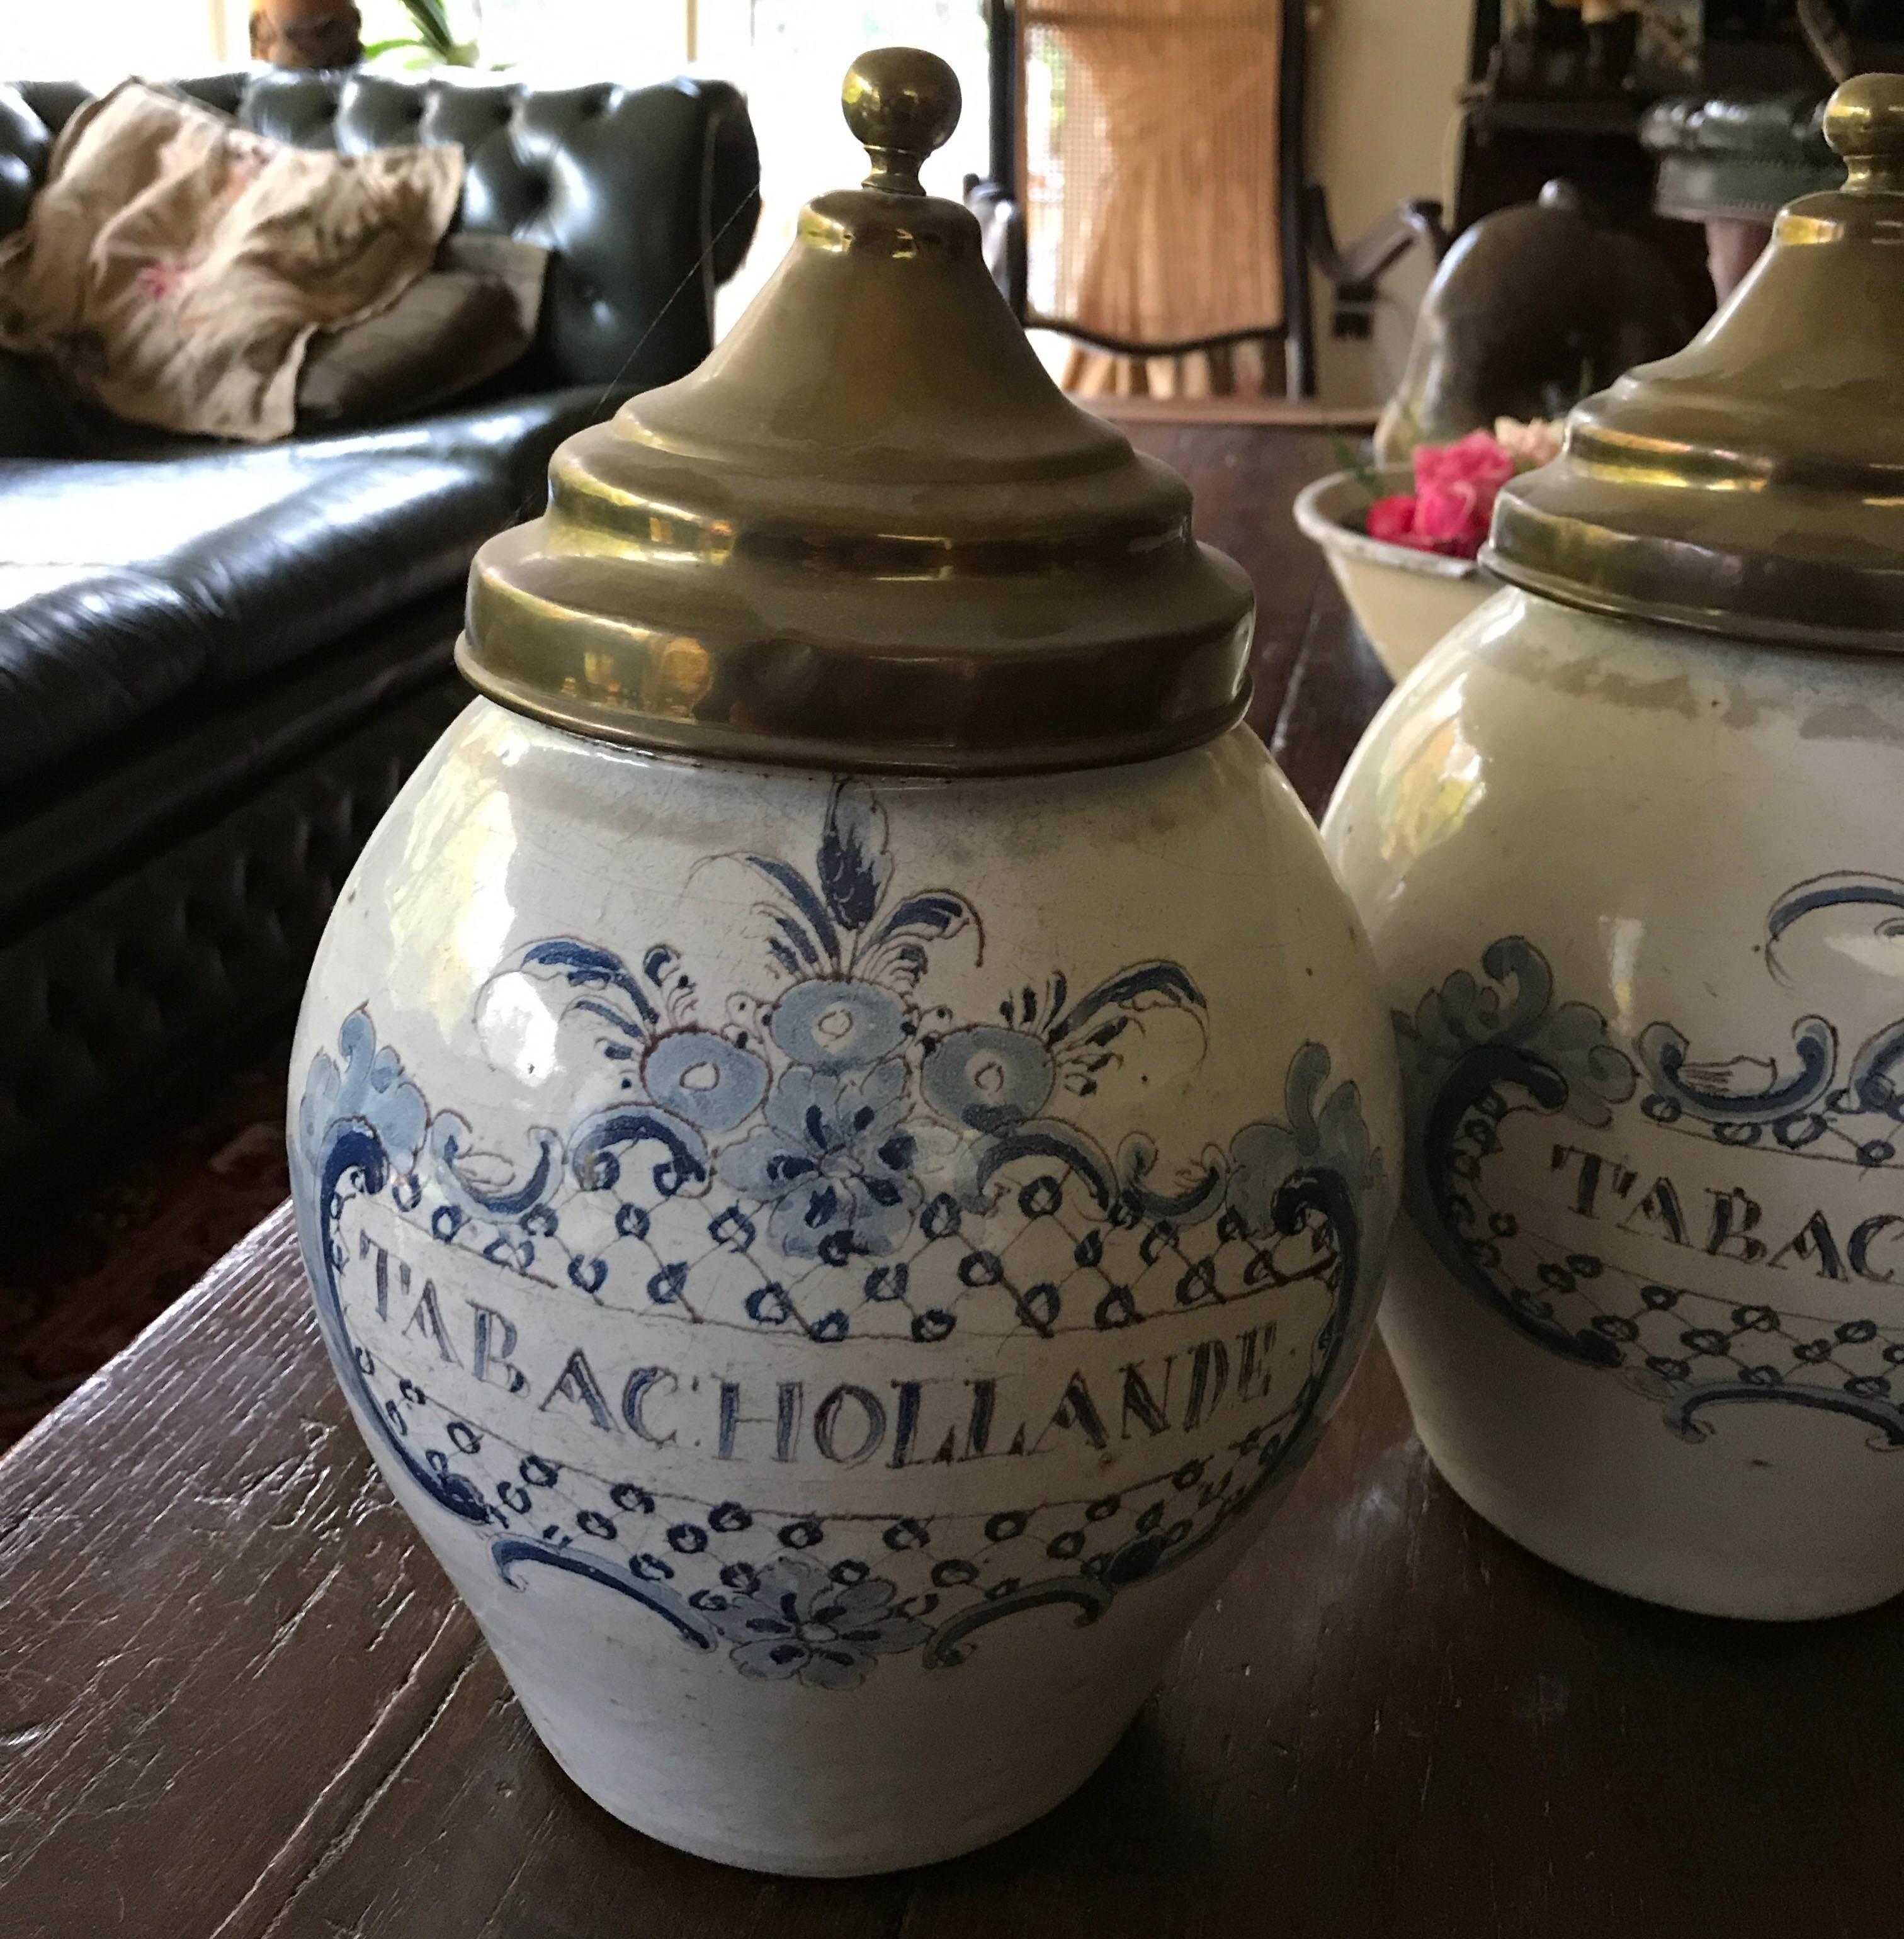 Two complete tobacco jars in delft blue
Probably made in France Strasbourg
18th century
One jar has a little damage under the lid.
       